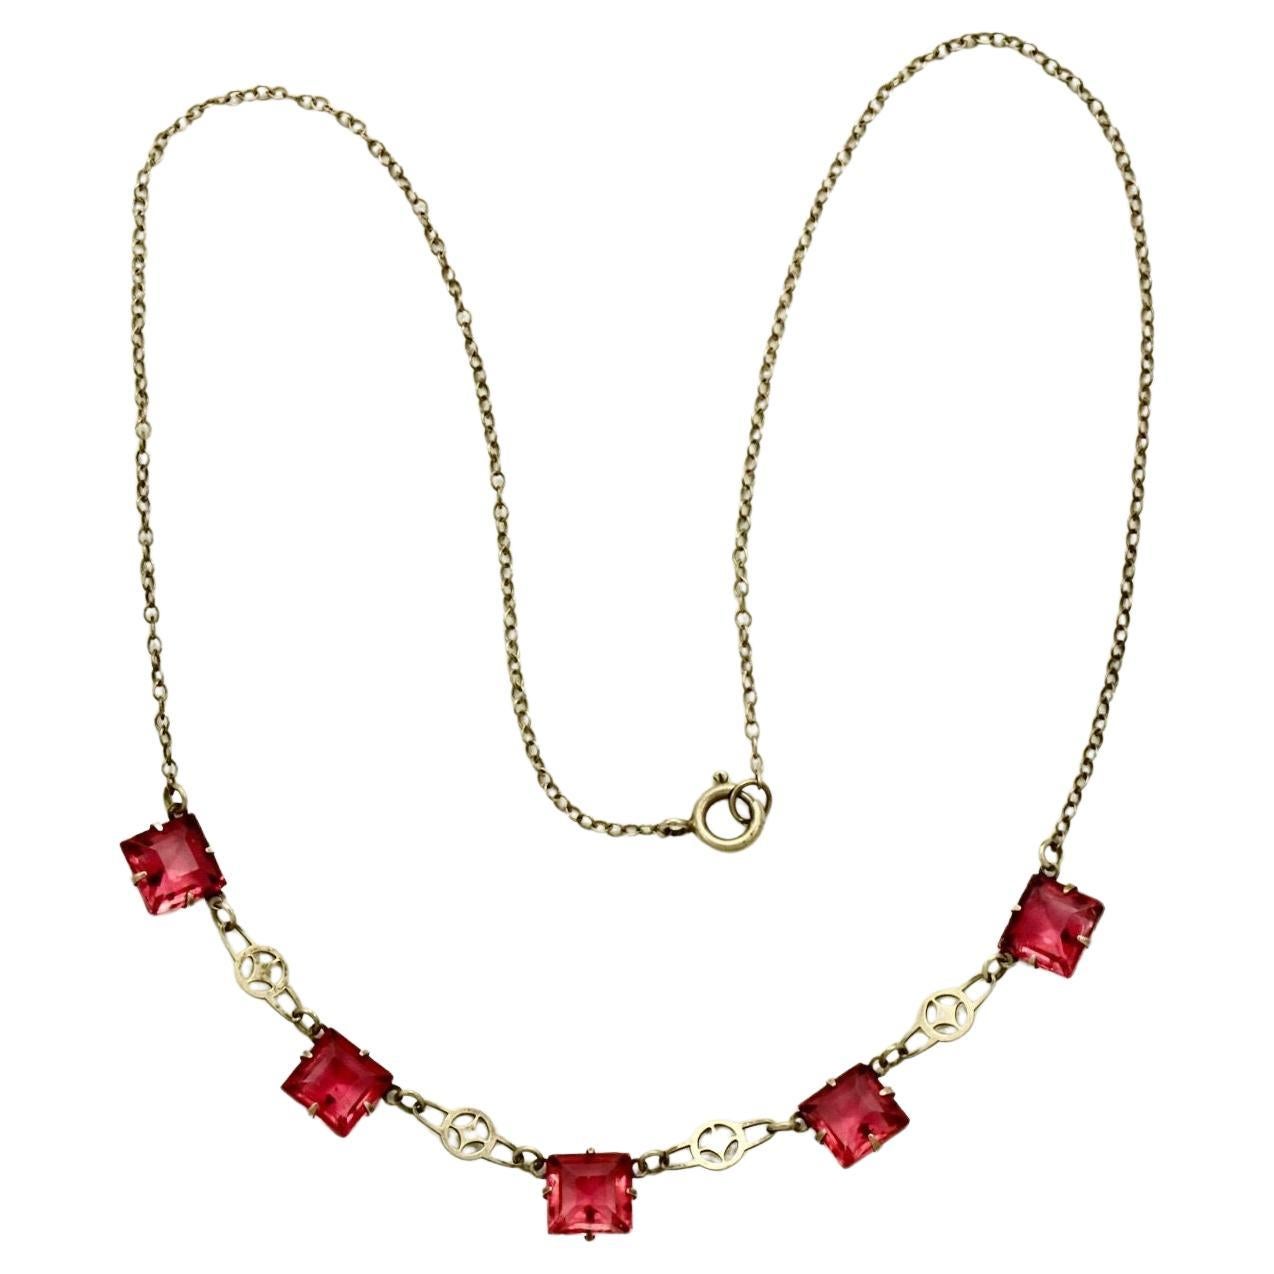 Art Deco Silver Tone Chain Necklace with Square Rouge Pink Glass Crystals